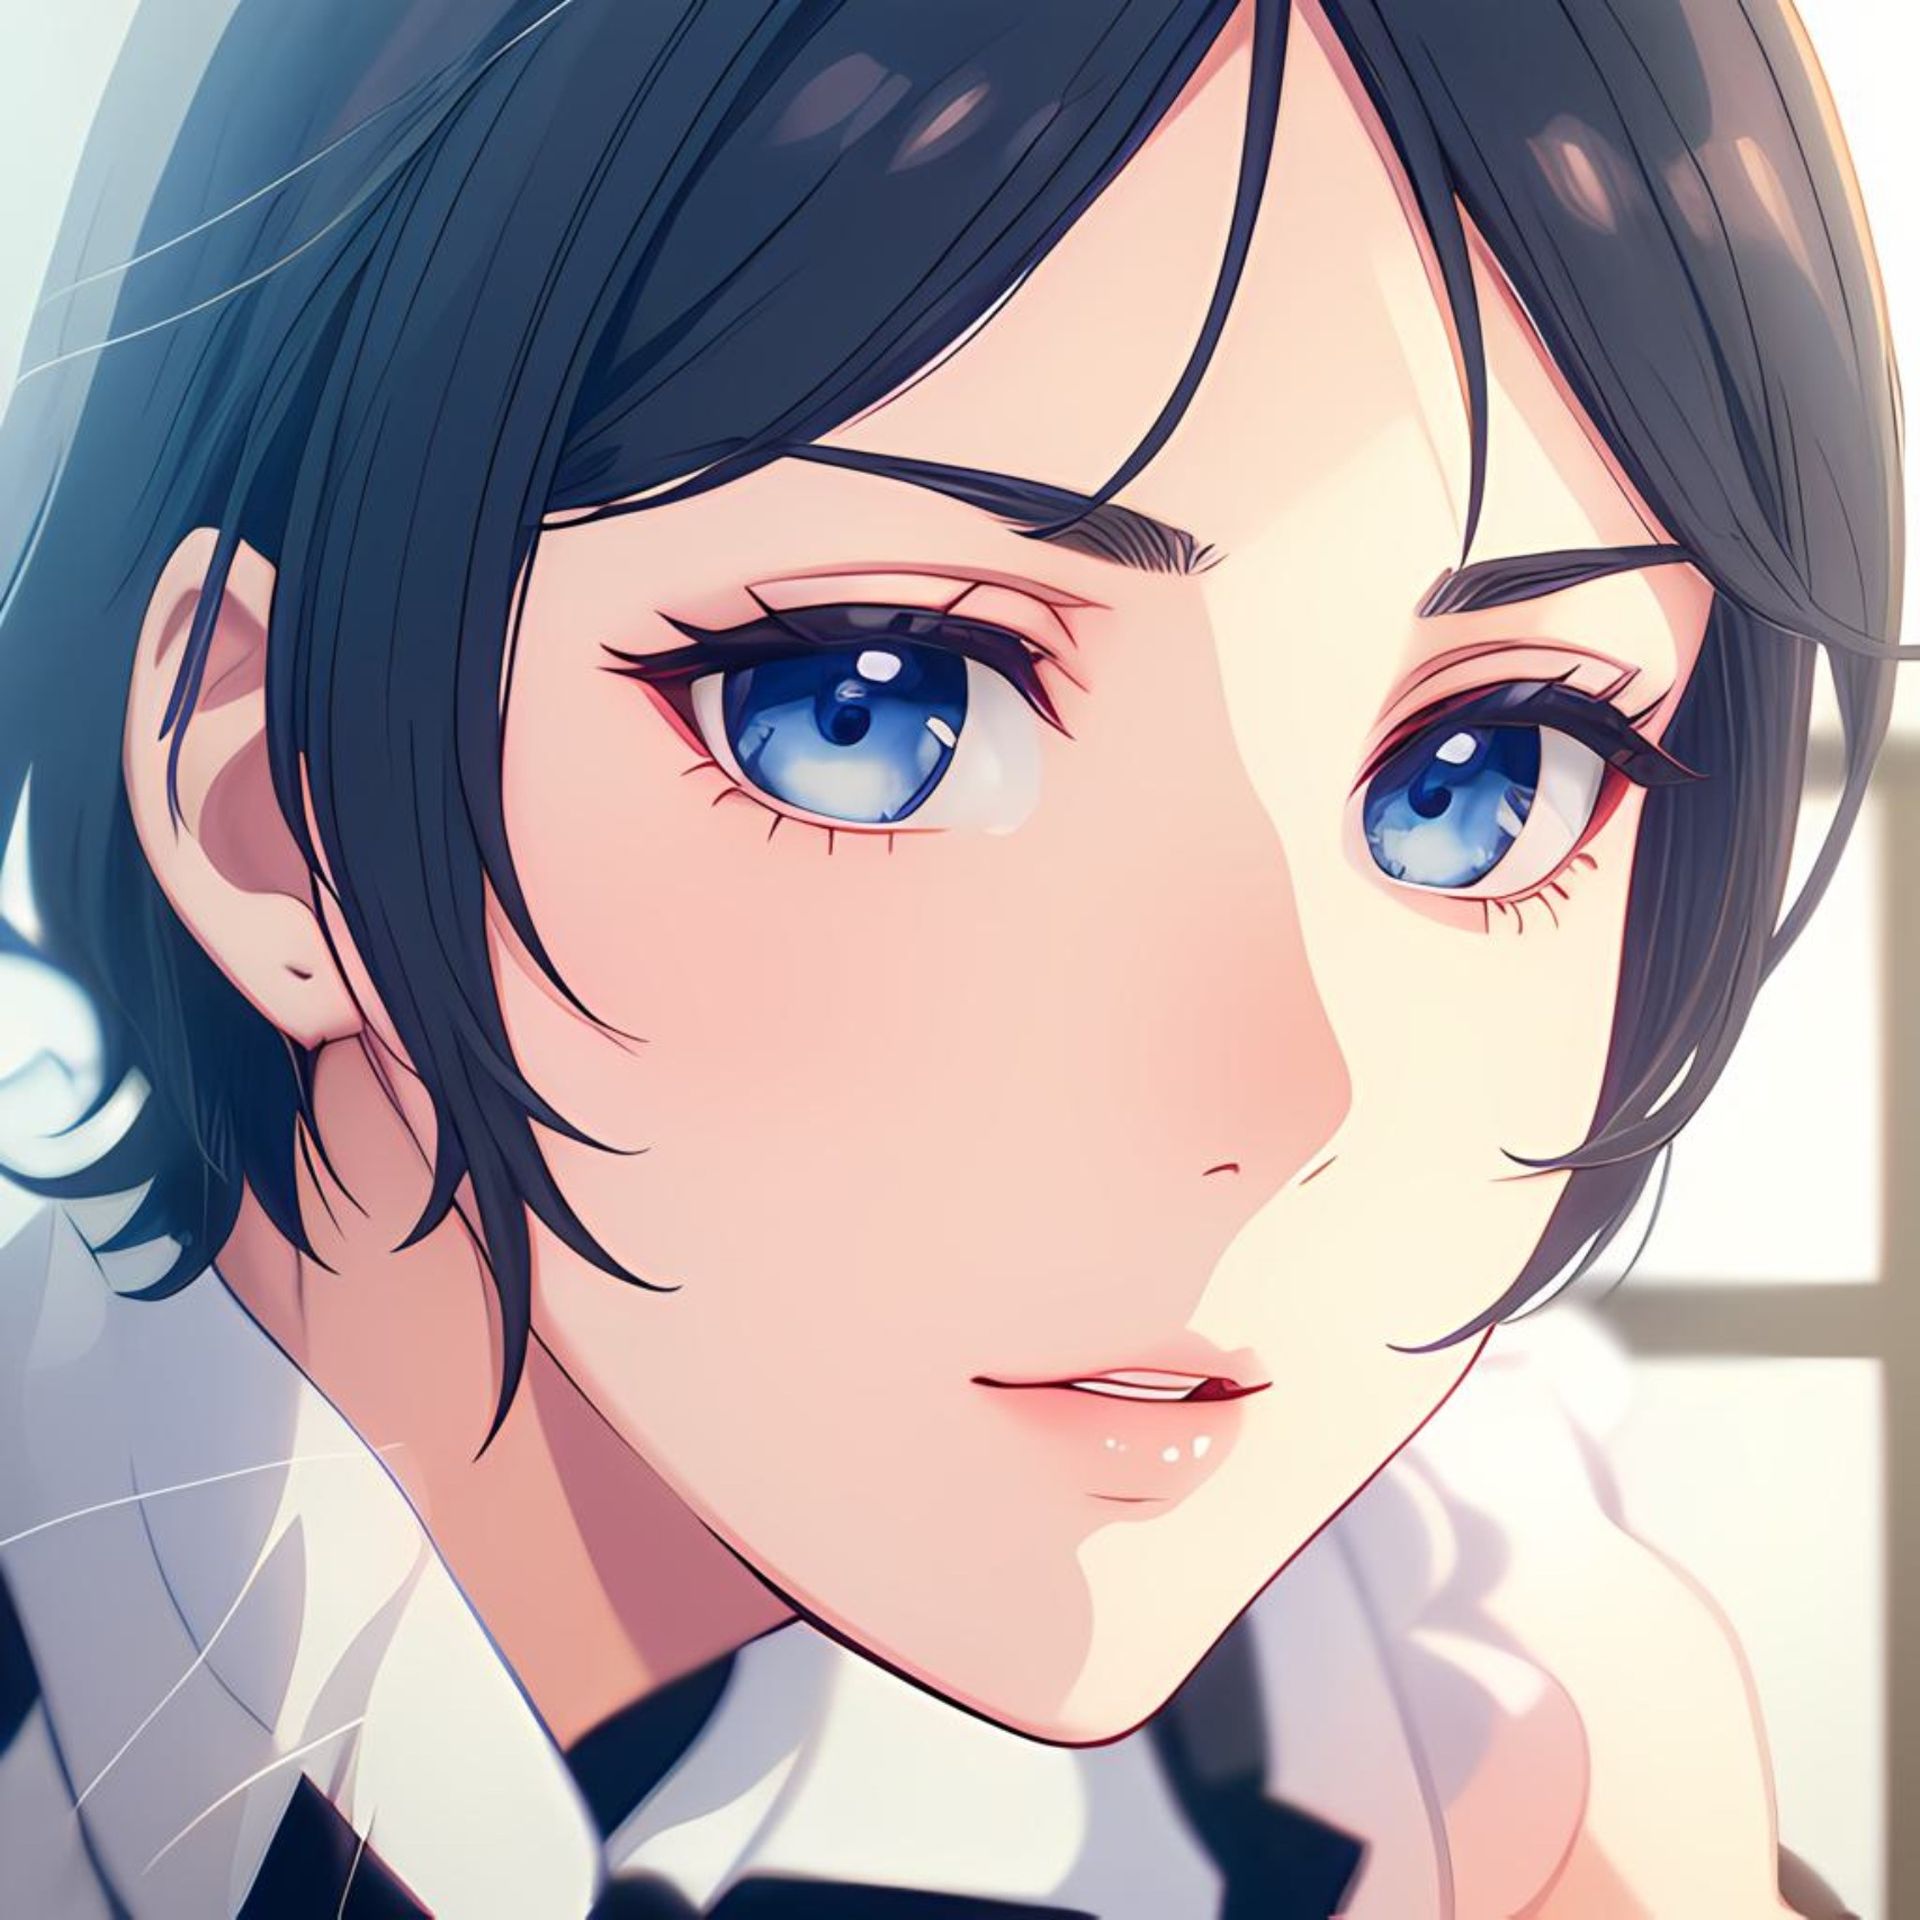 A maid, with blue eyes and short hair.